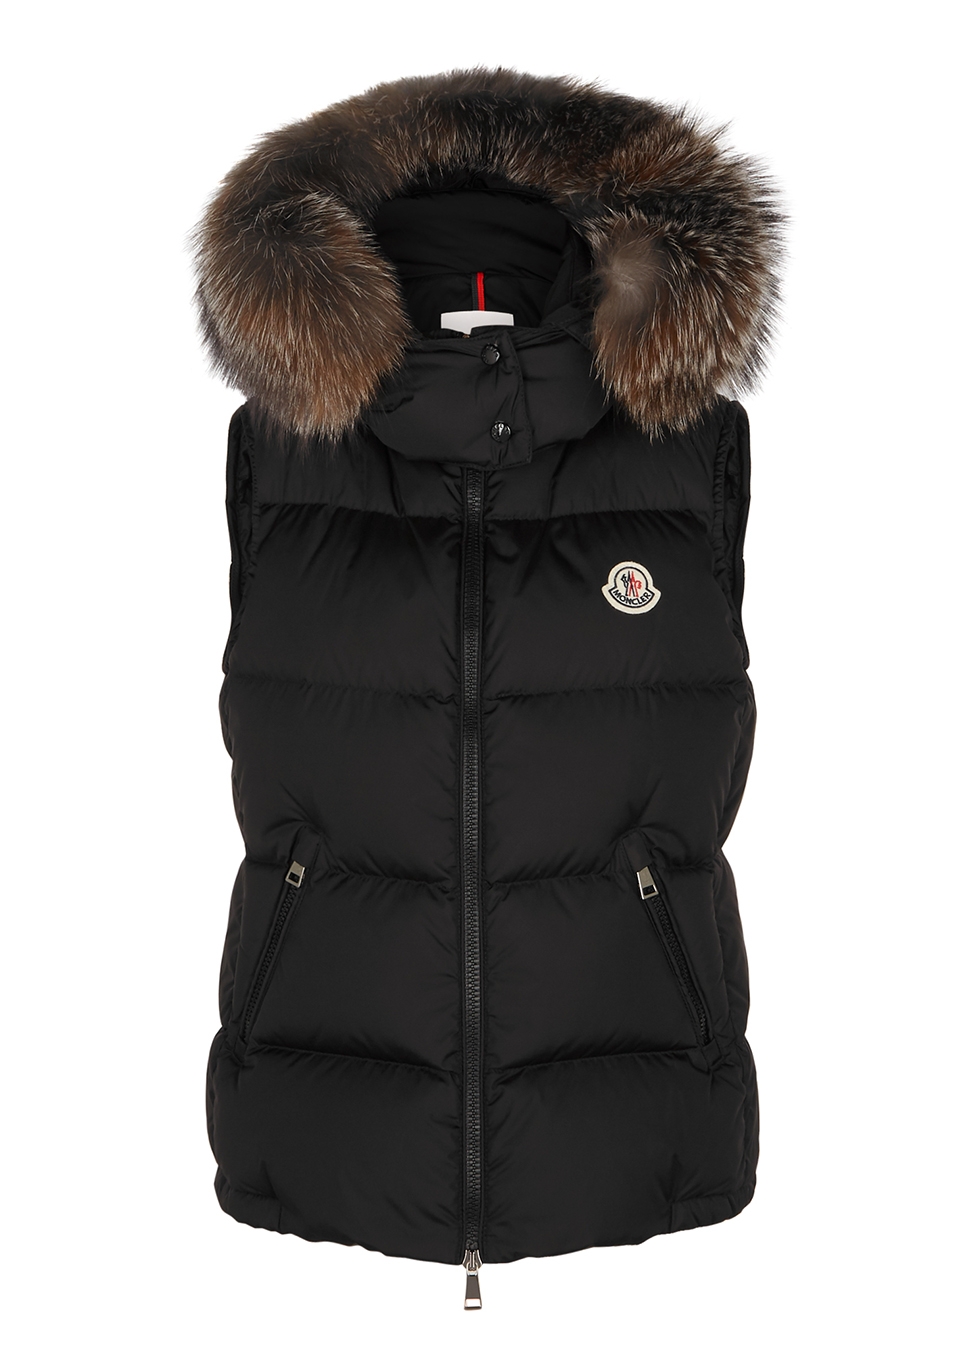 mens moncler gilet with hood